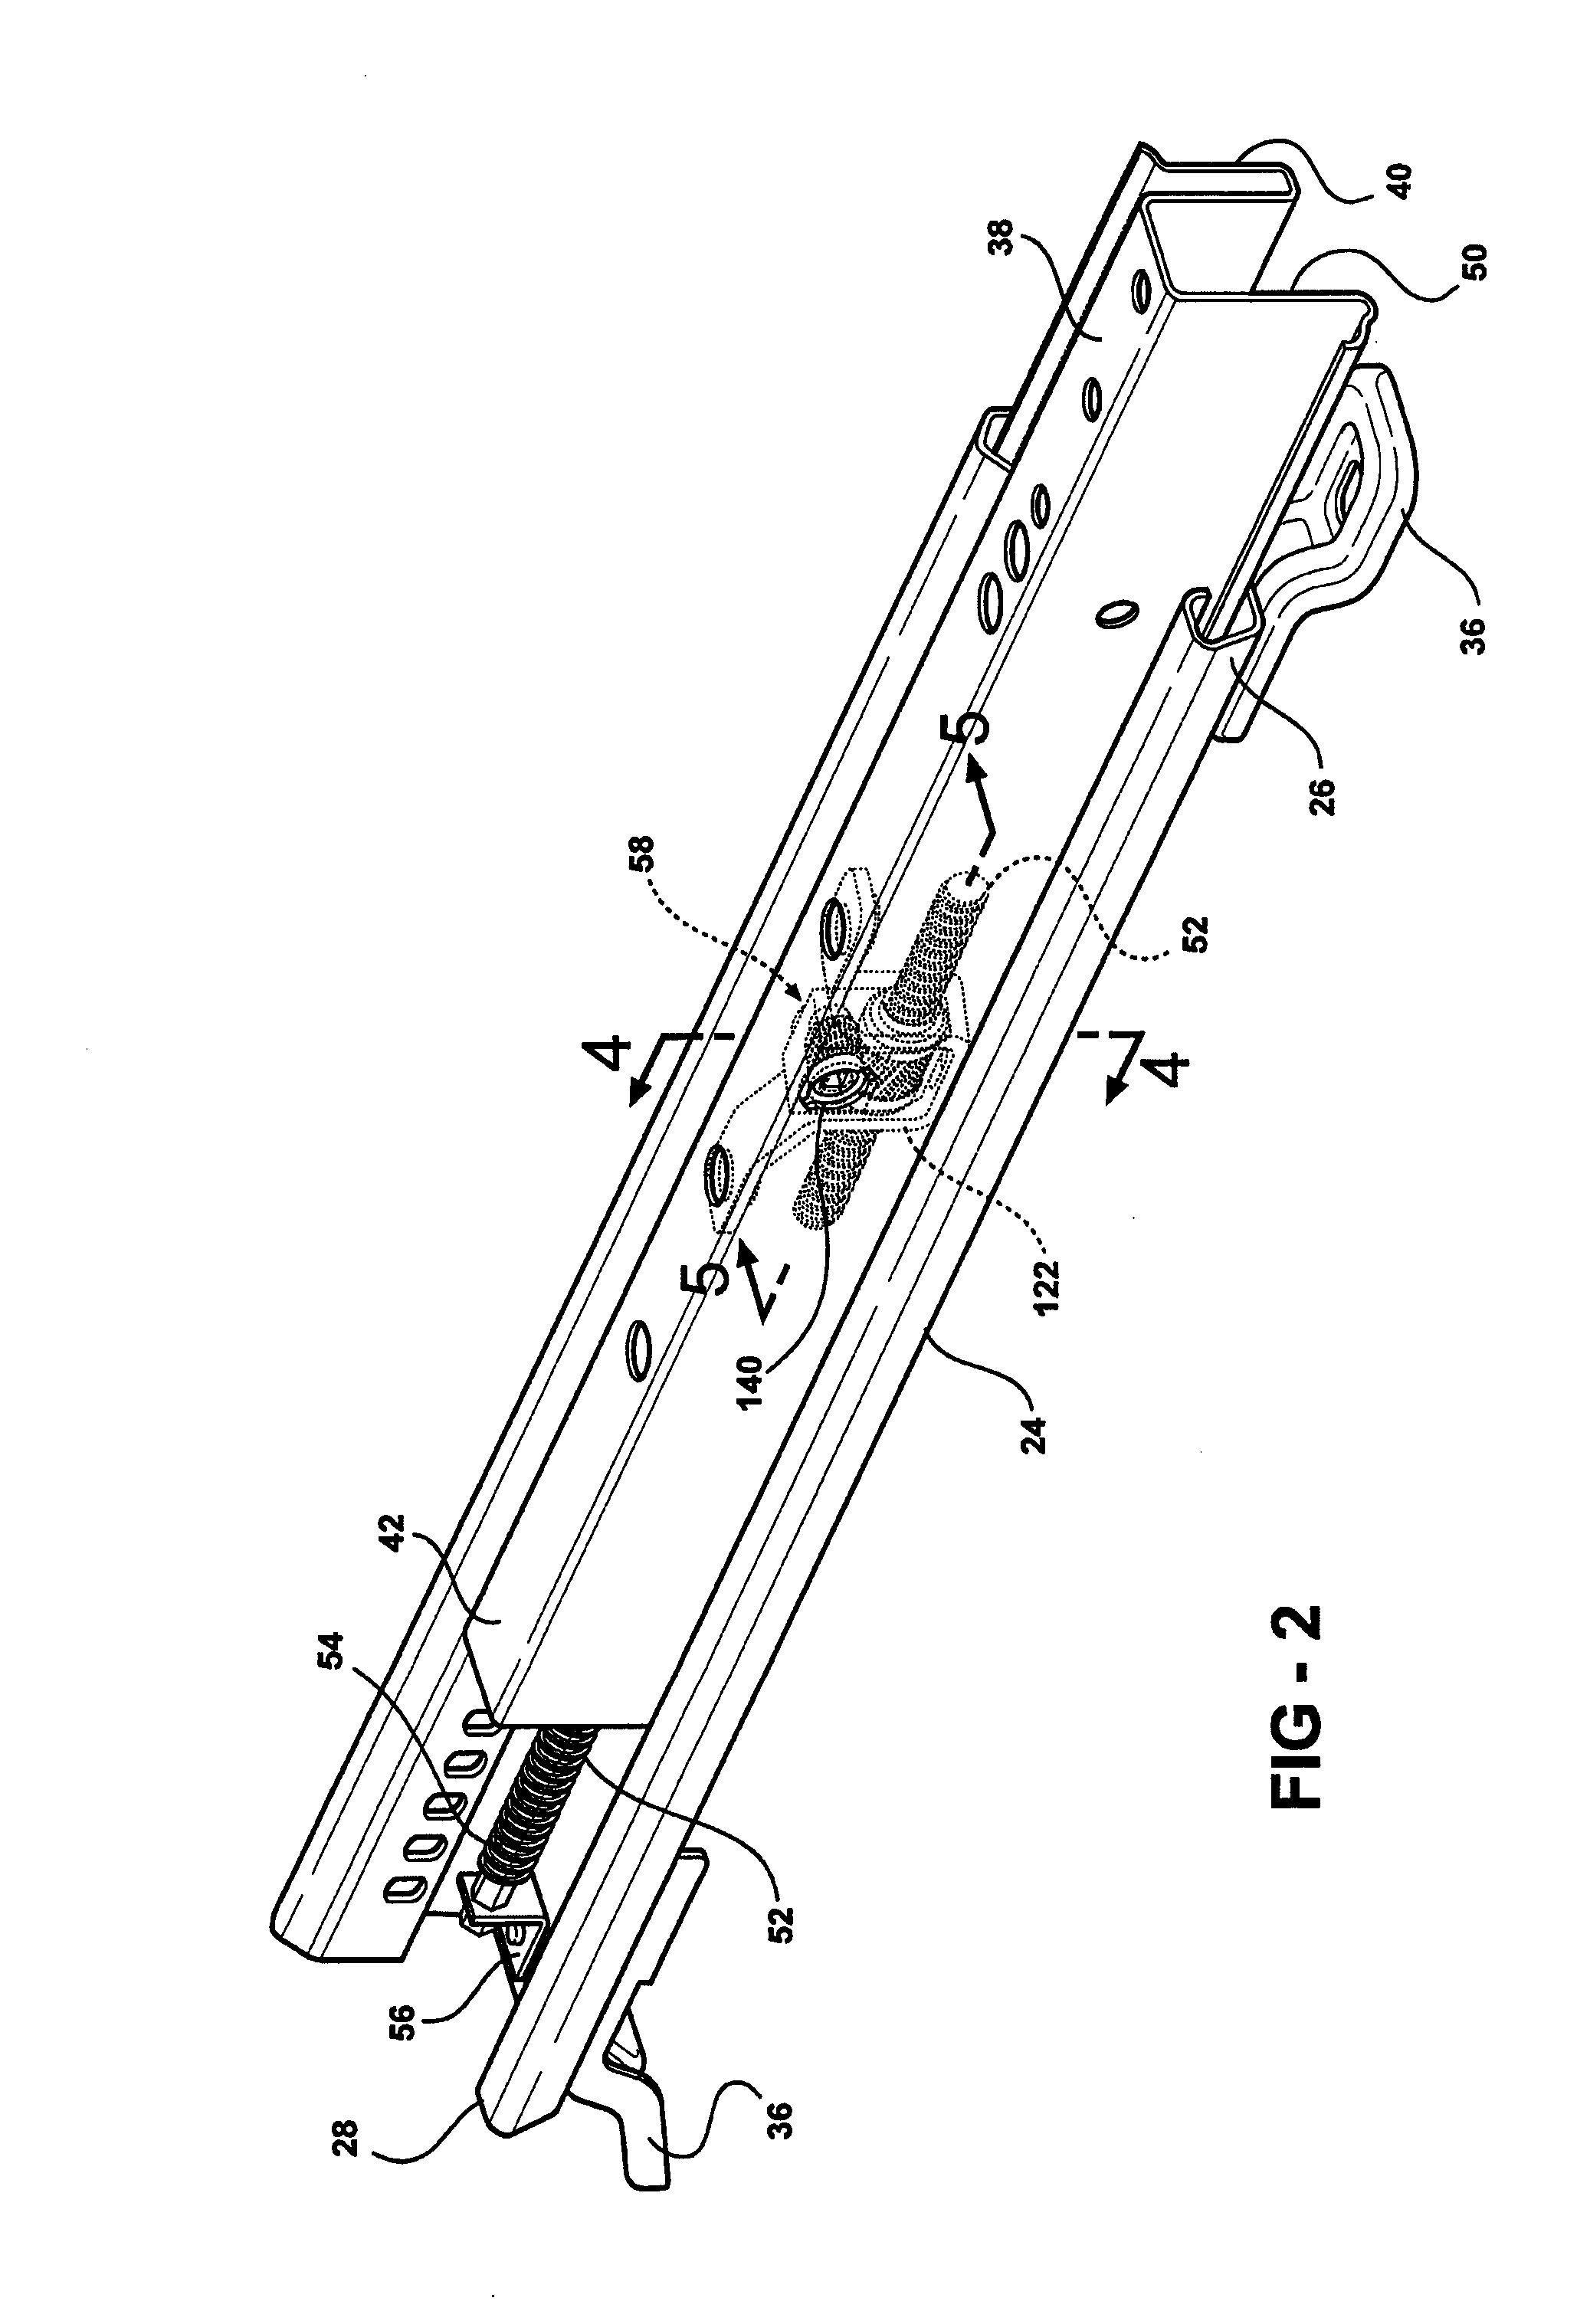 Power seat track drive assembly